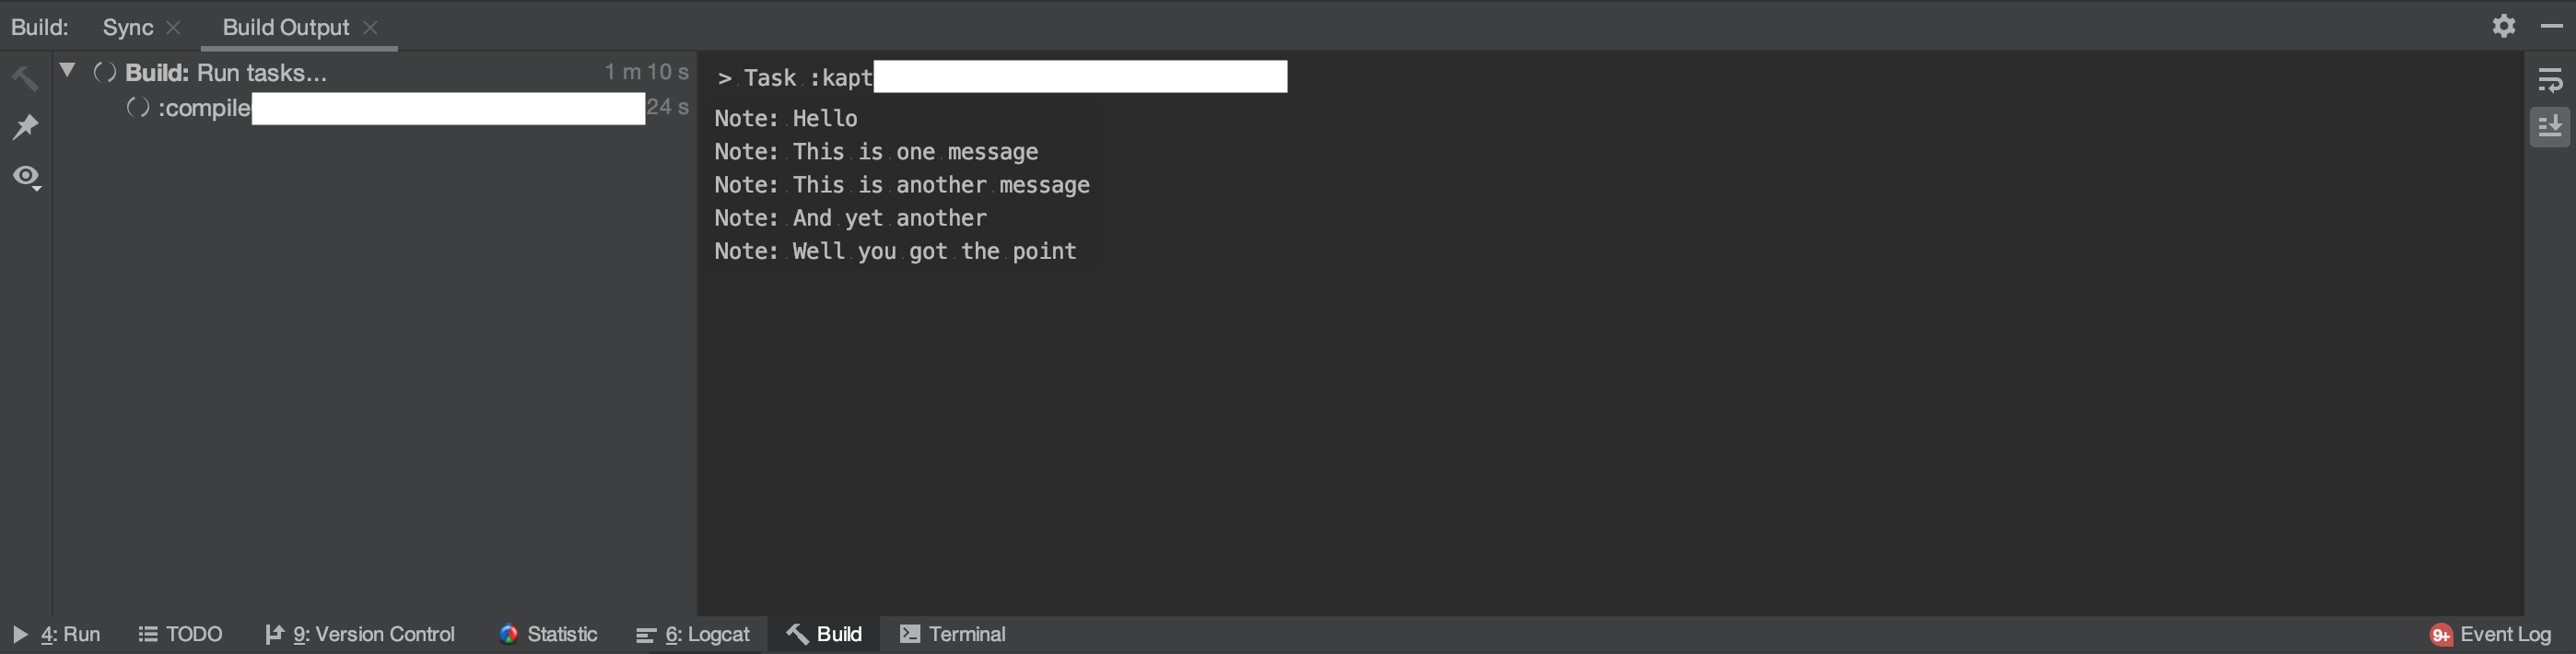 Build view on Android Studio (multiple printMessage() multi-lined)